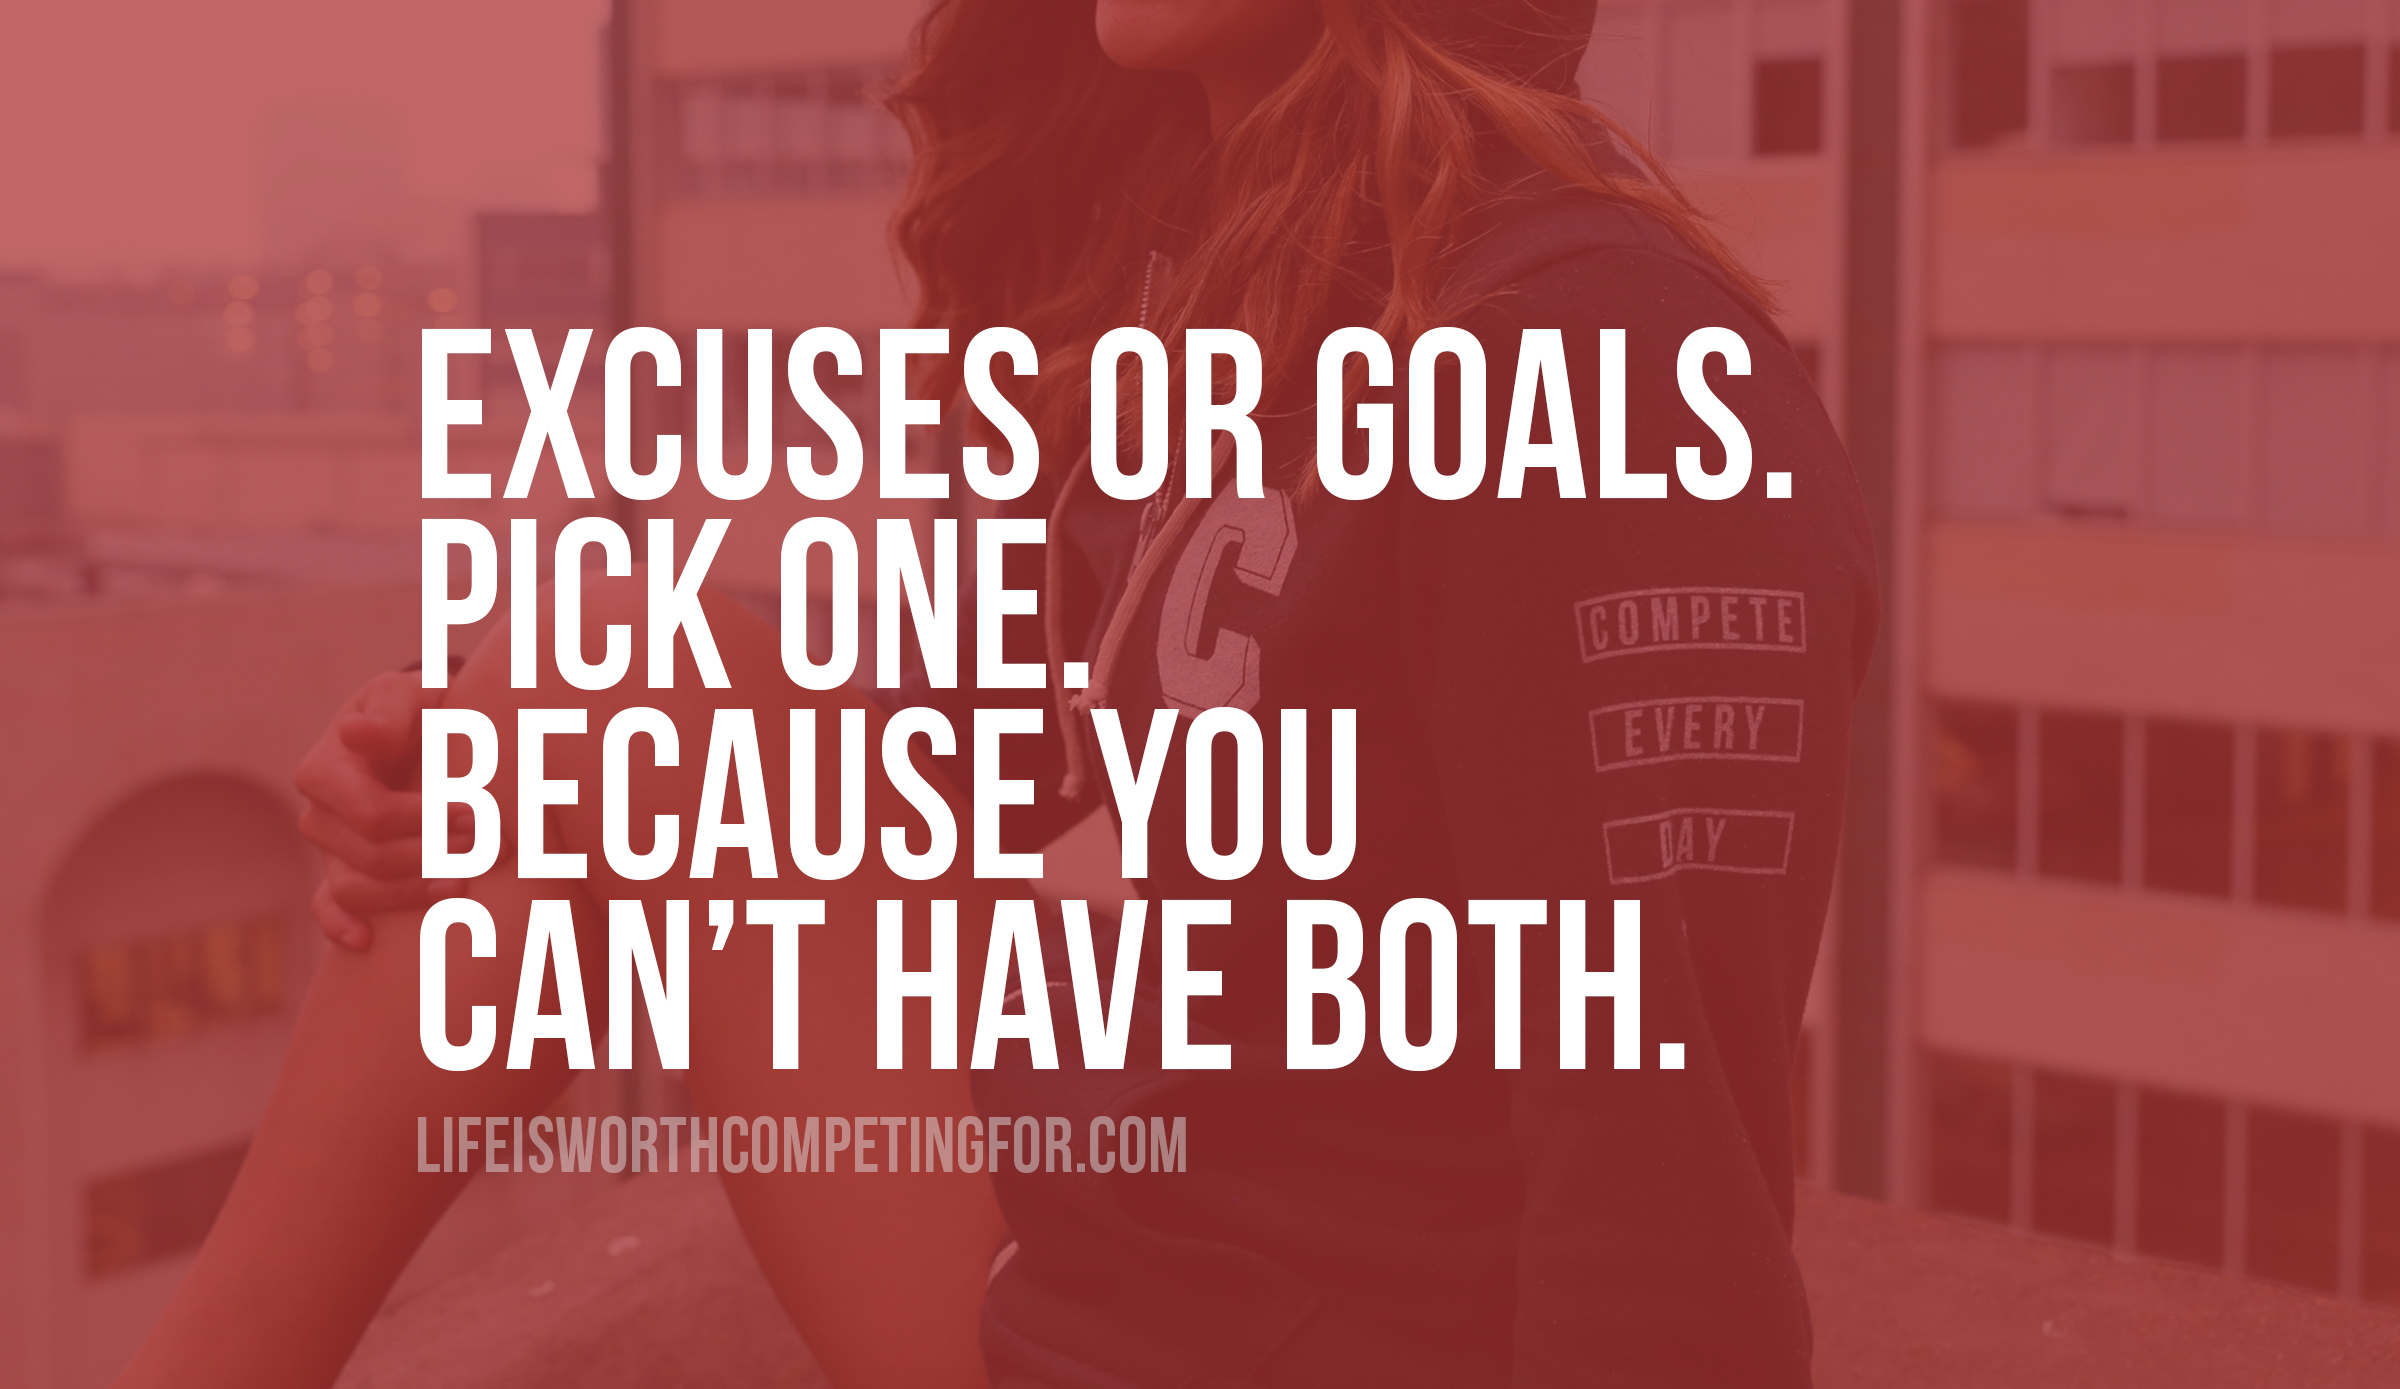 Excuses or goals - you can't have both